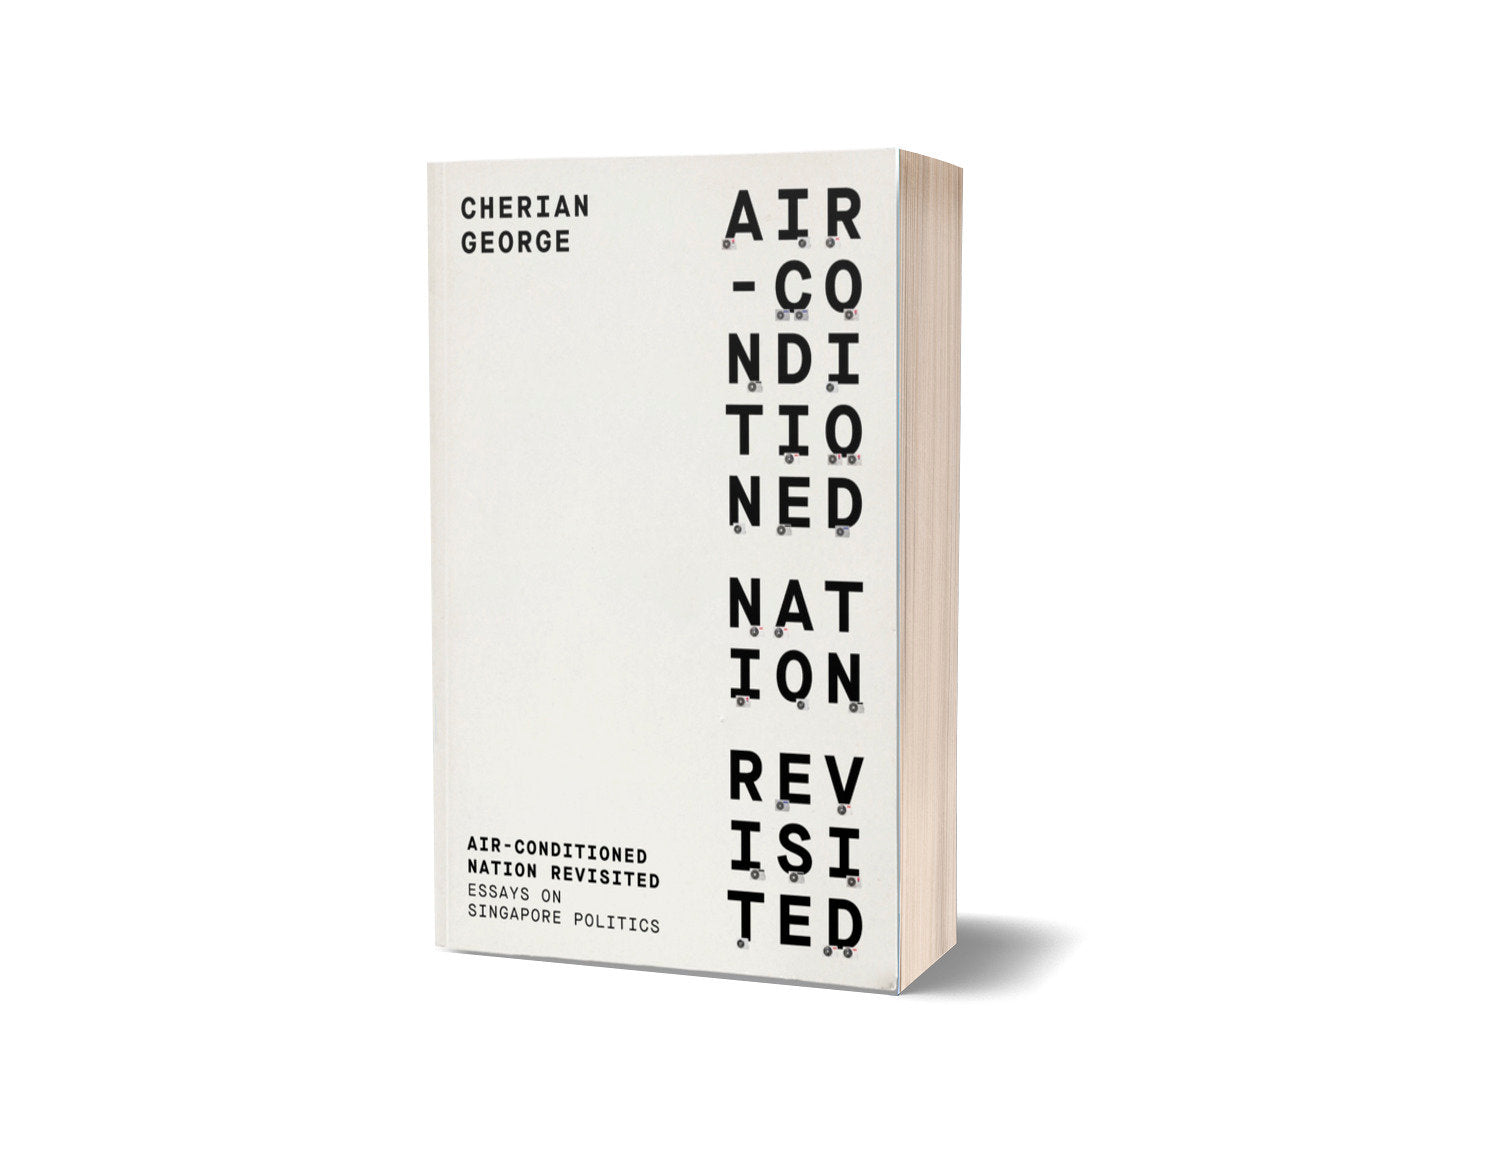 Air-Conditioned Nation Revisited／by Cherian George